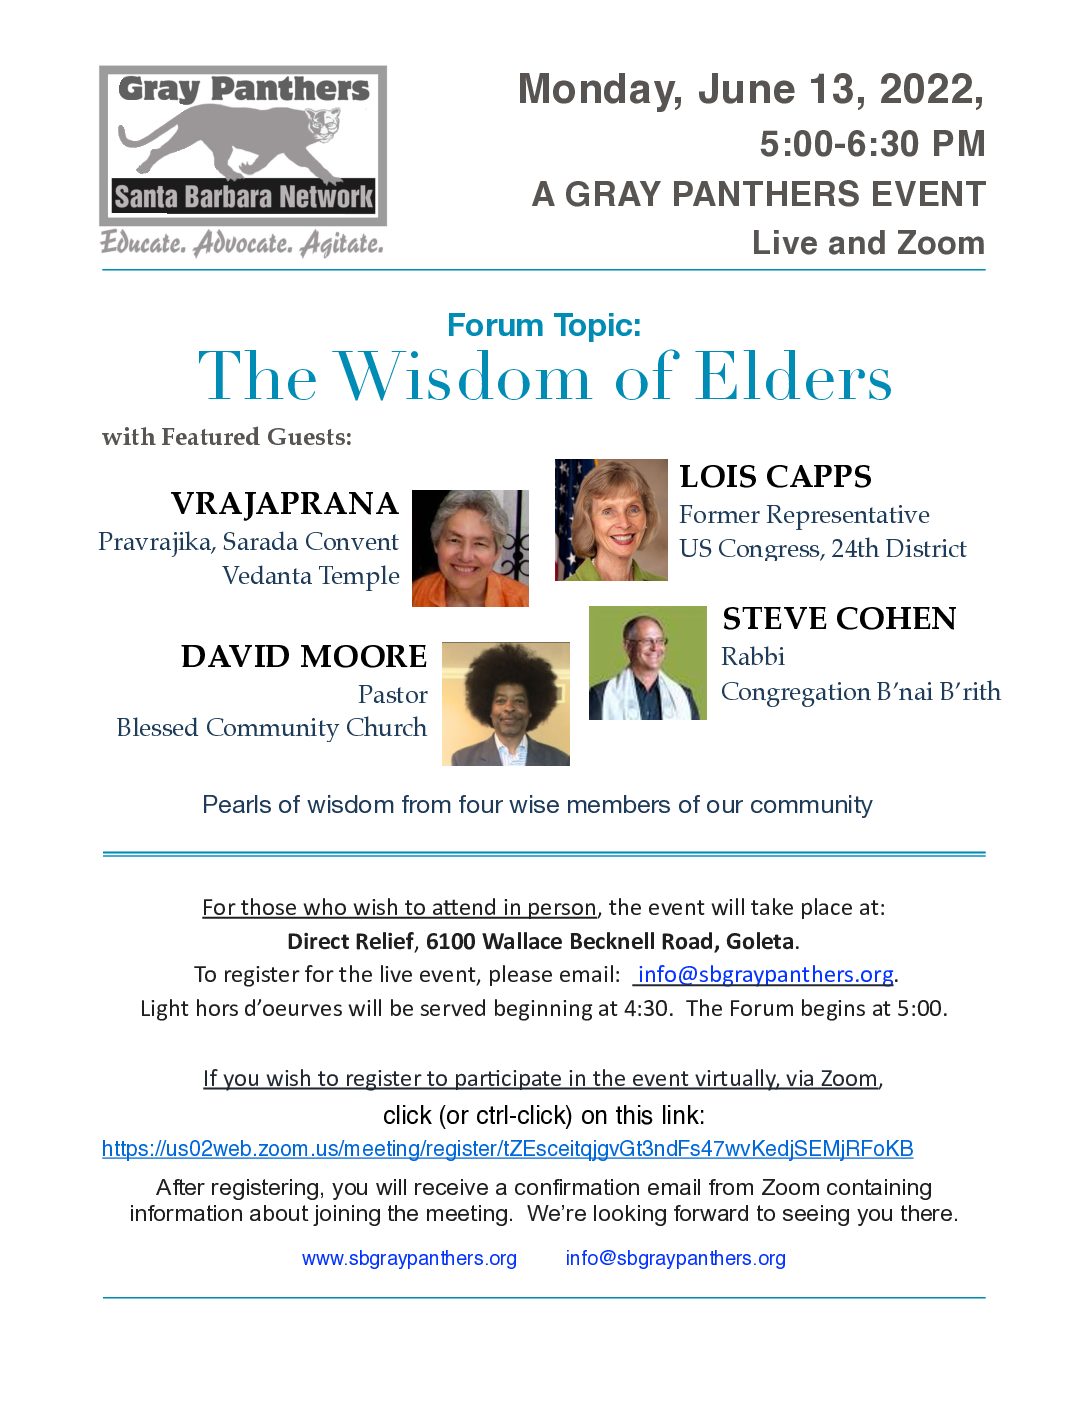 Gray Panthers Event: The Wisdom of Elders